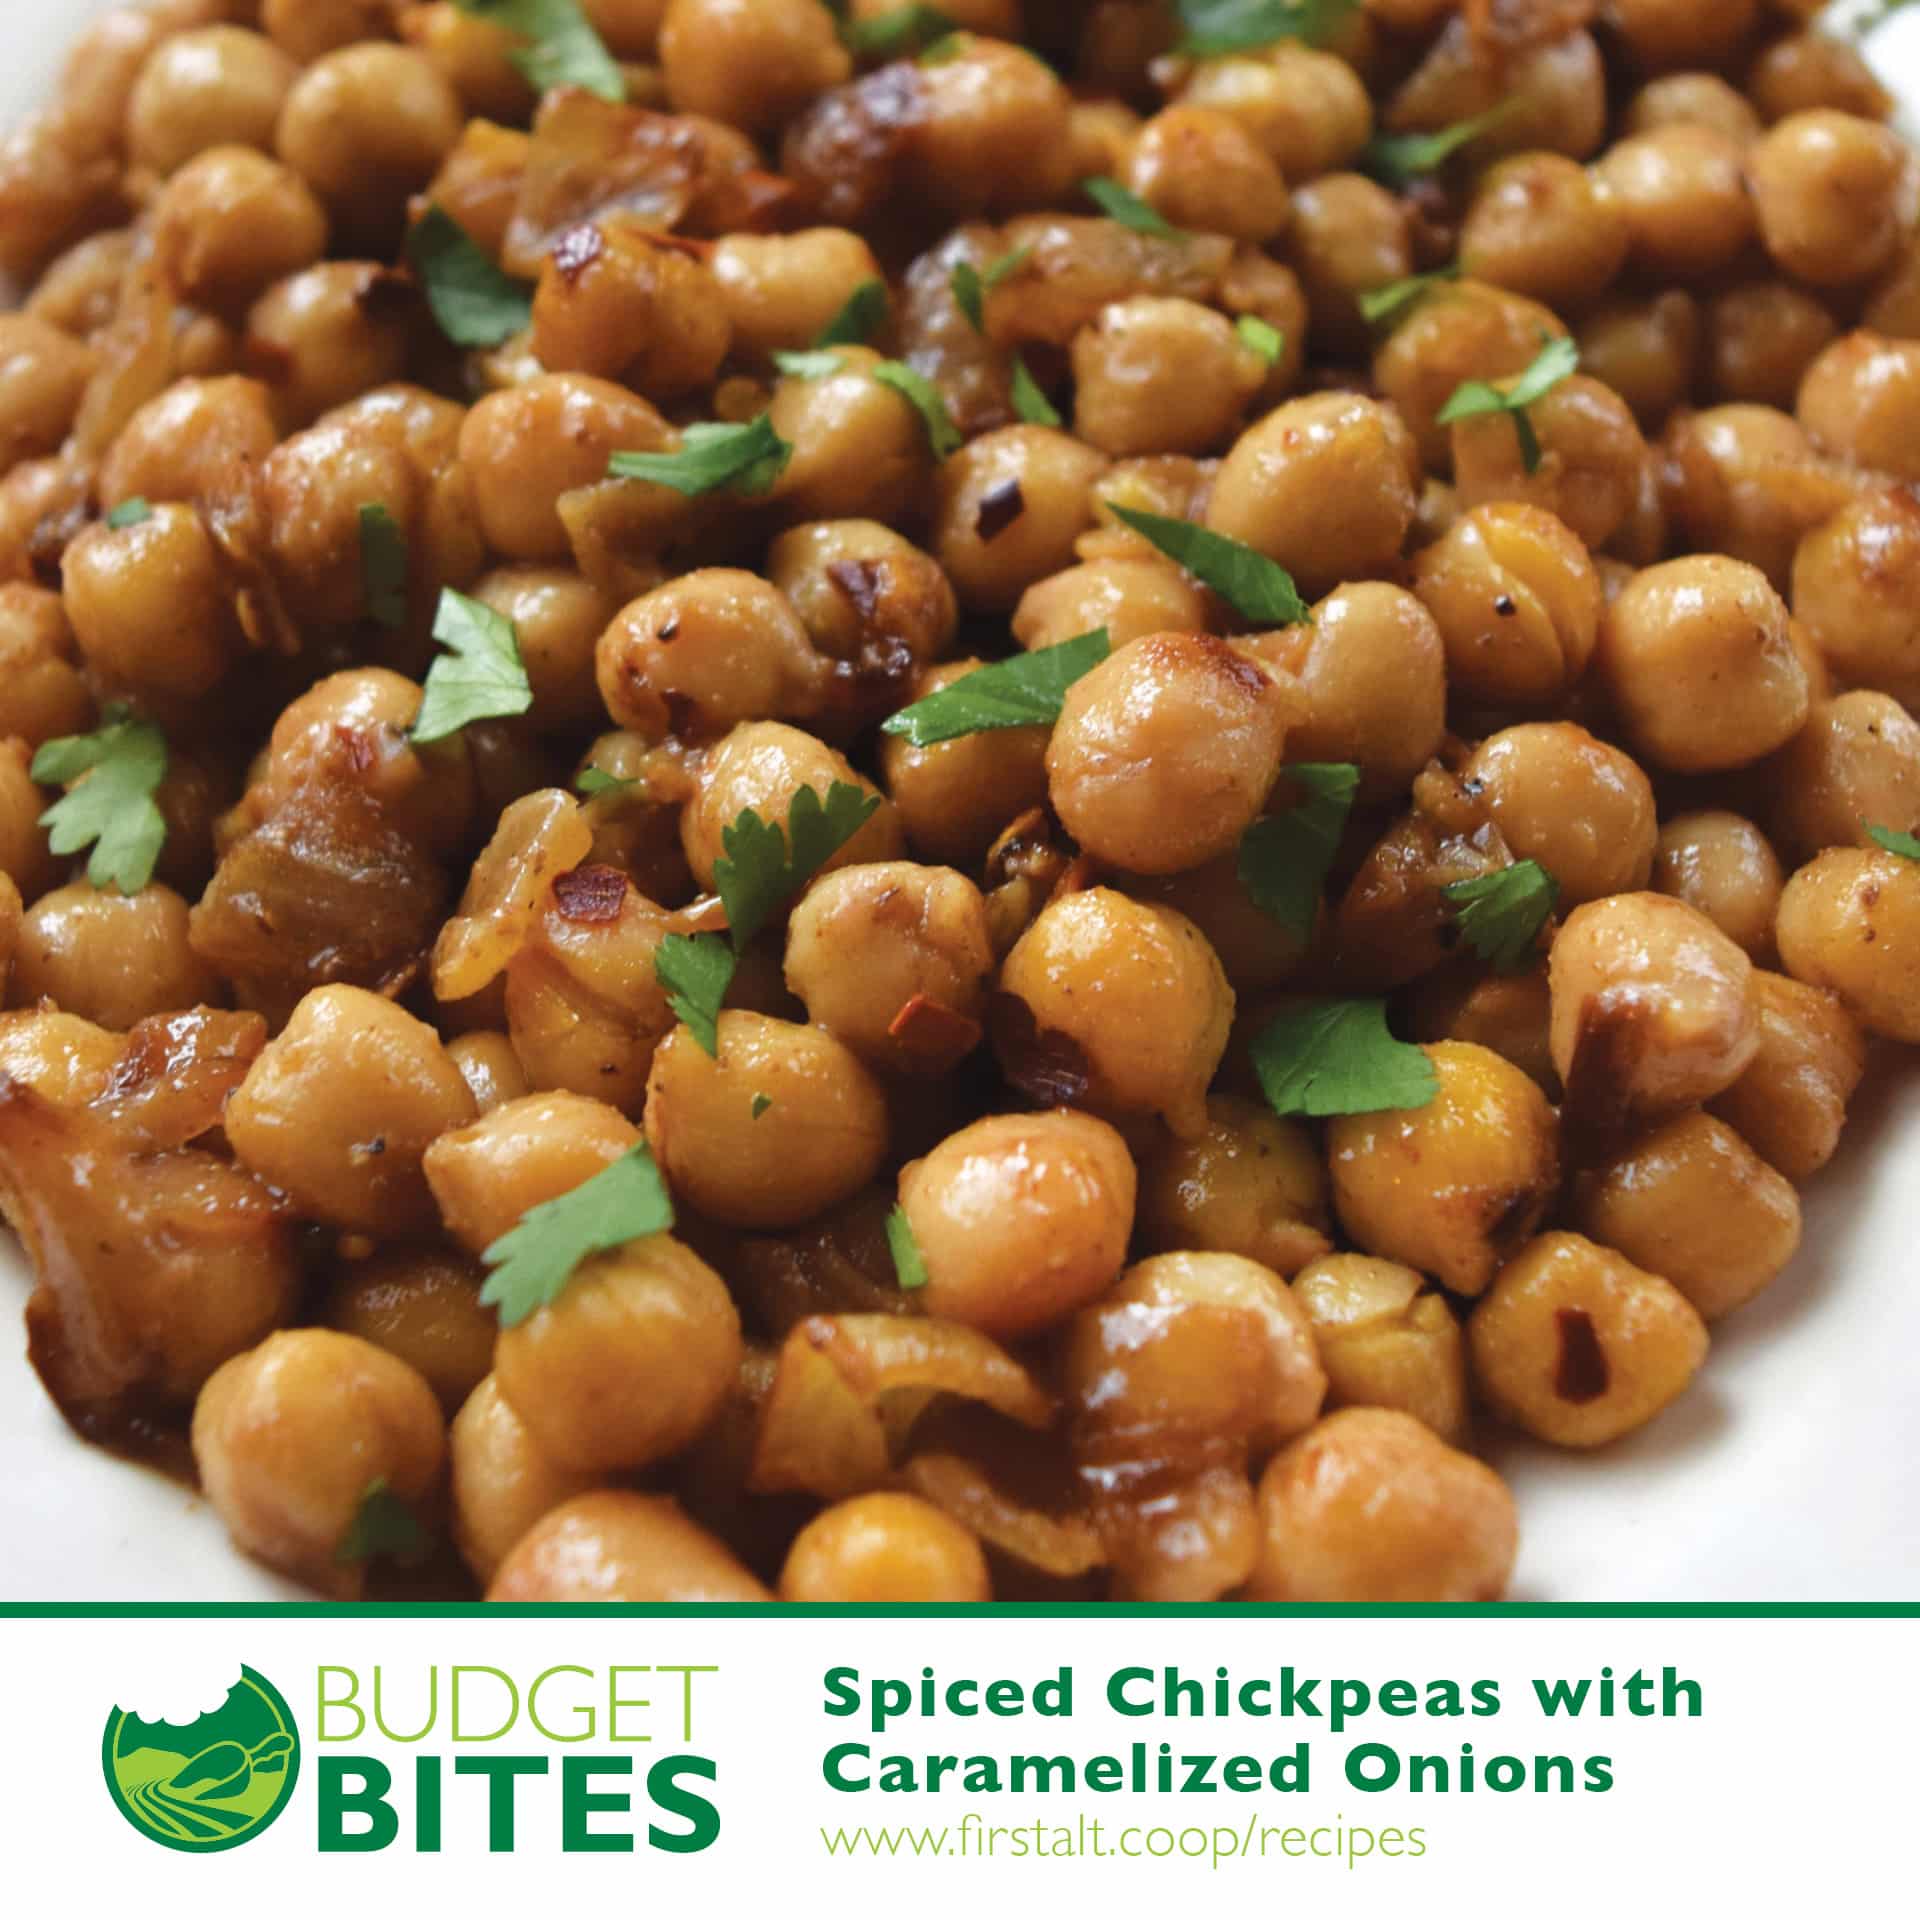 Budget Bites Online – Spiced Chickpeas with Caramelized Onions